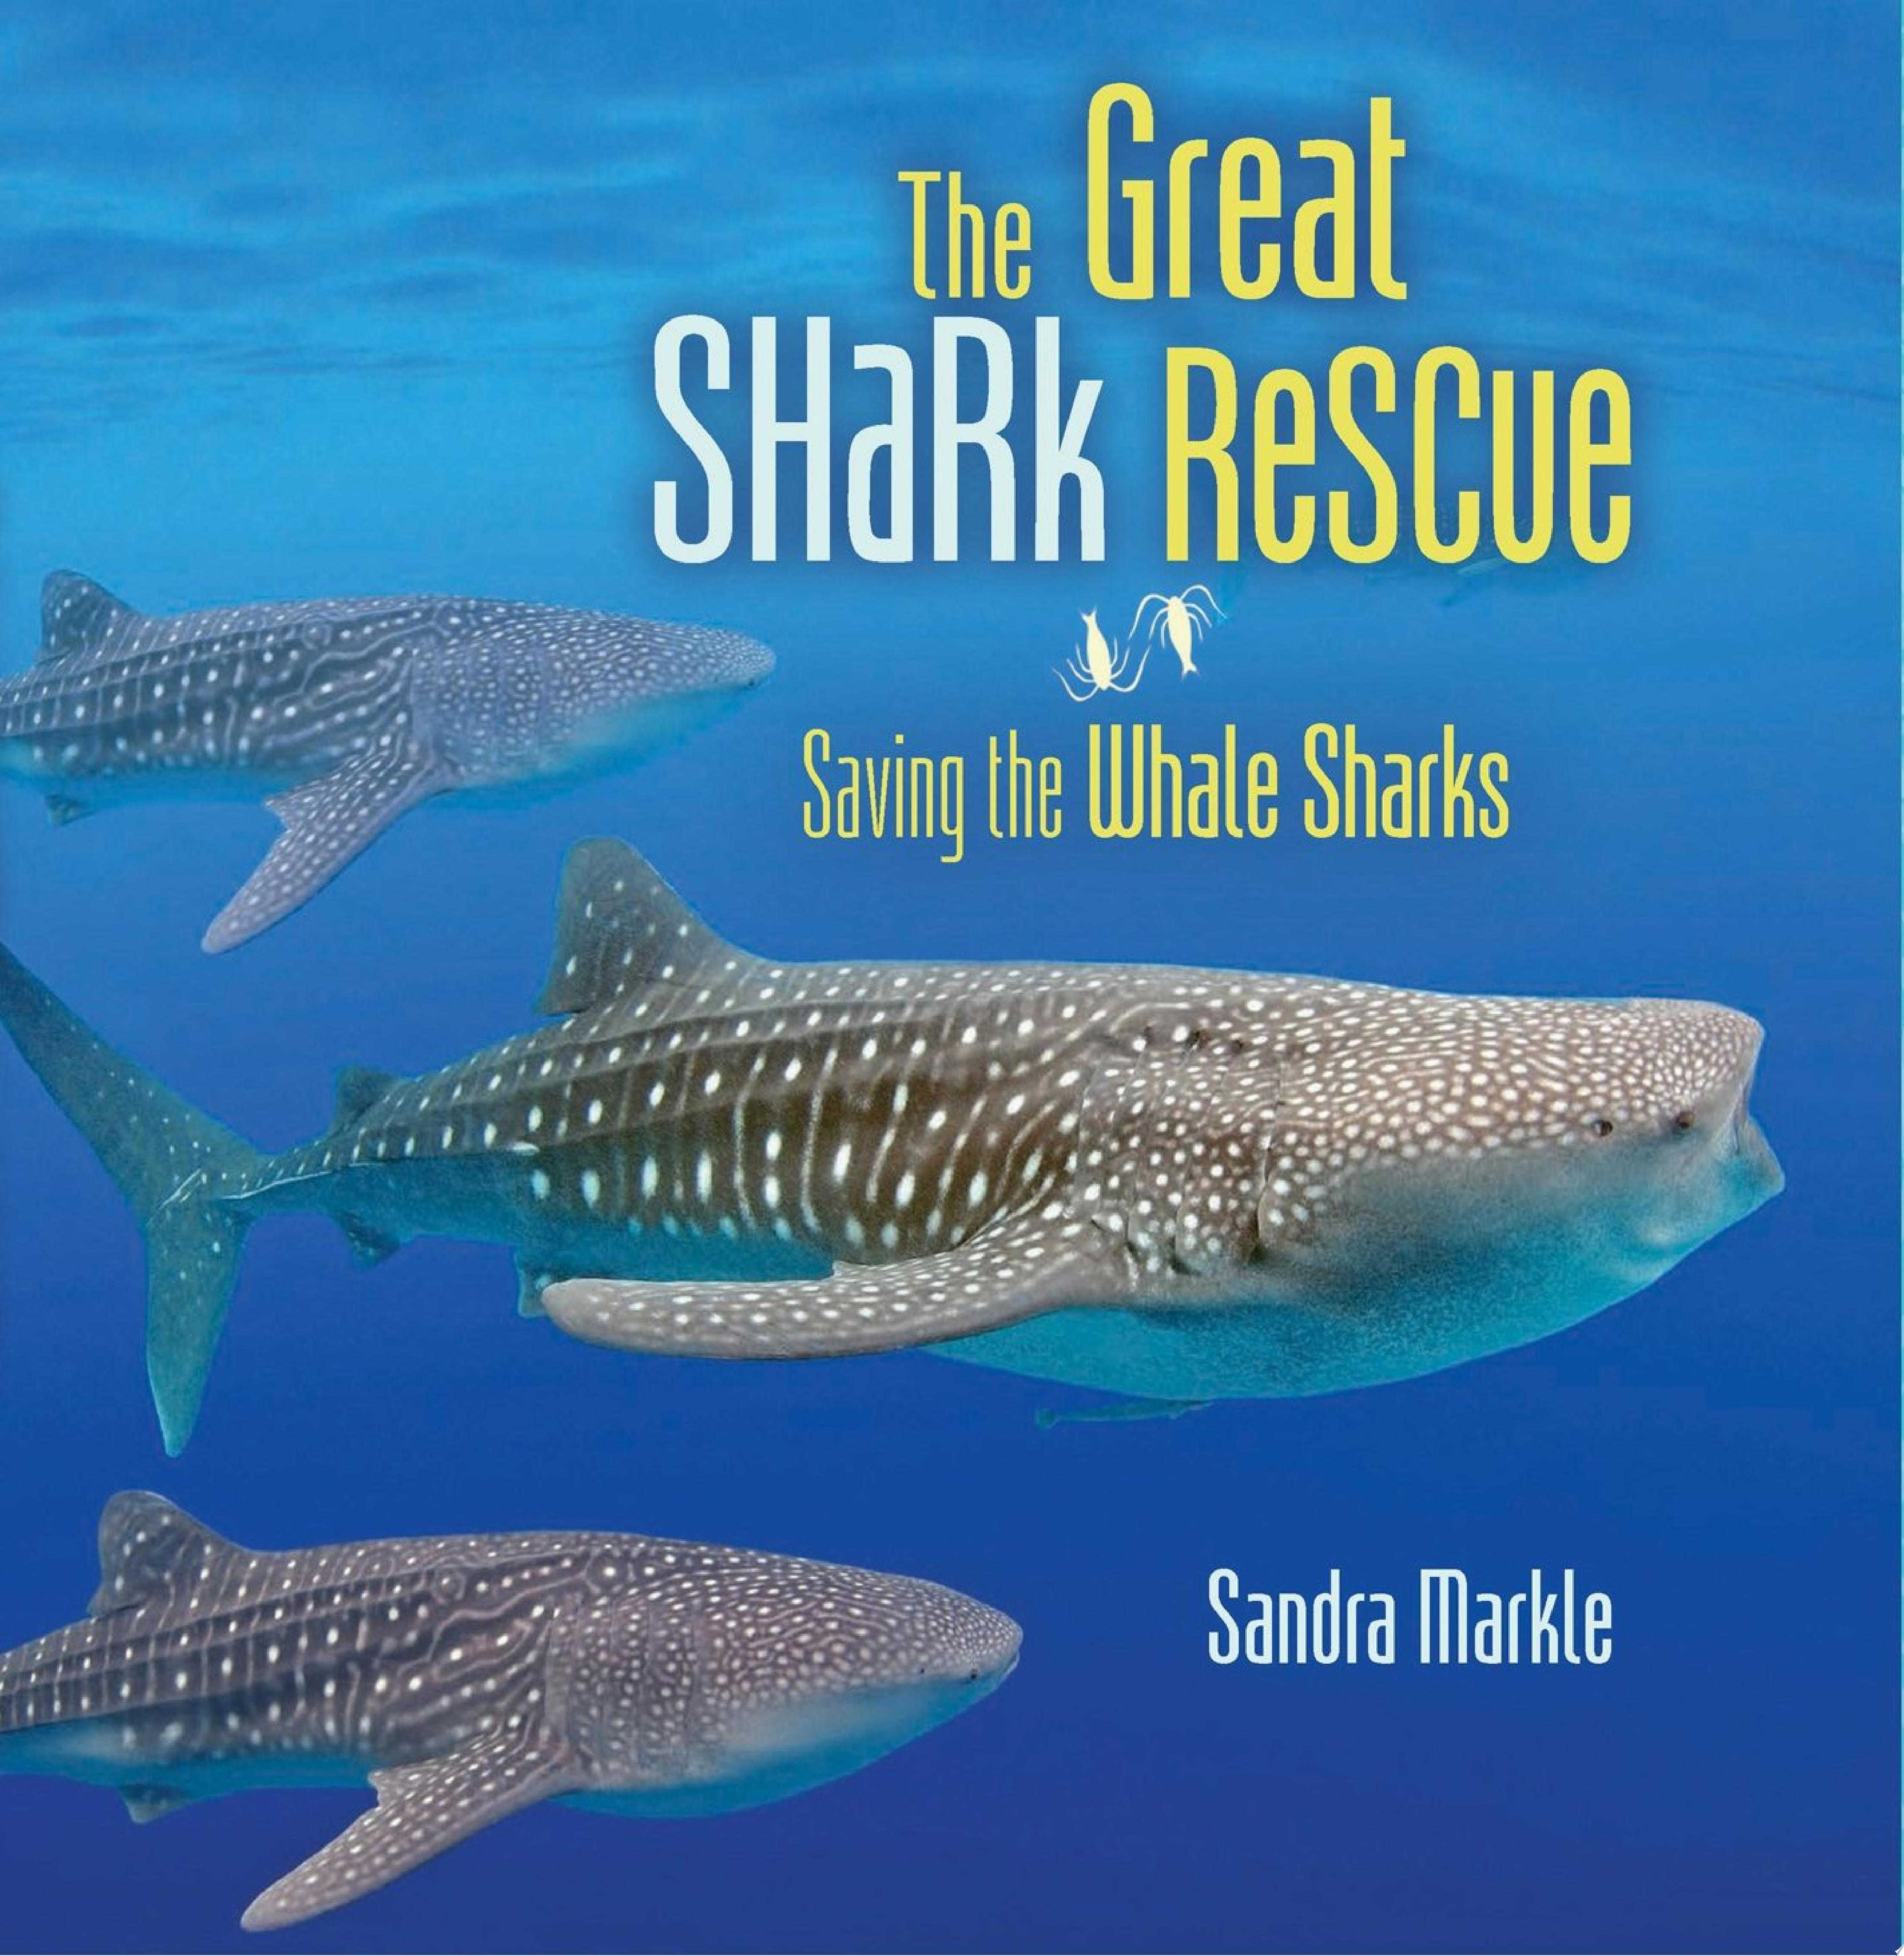 Image for "The Great Shark Rescue"